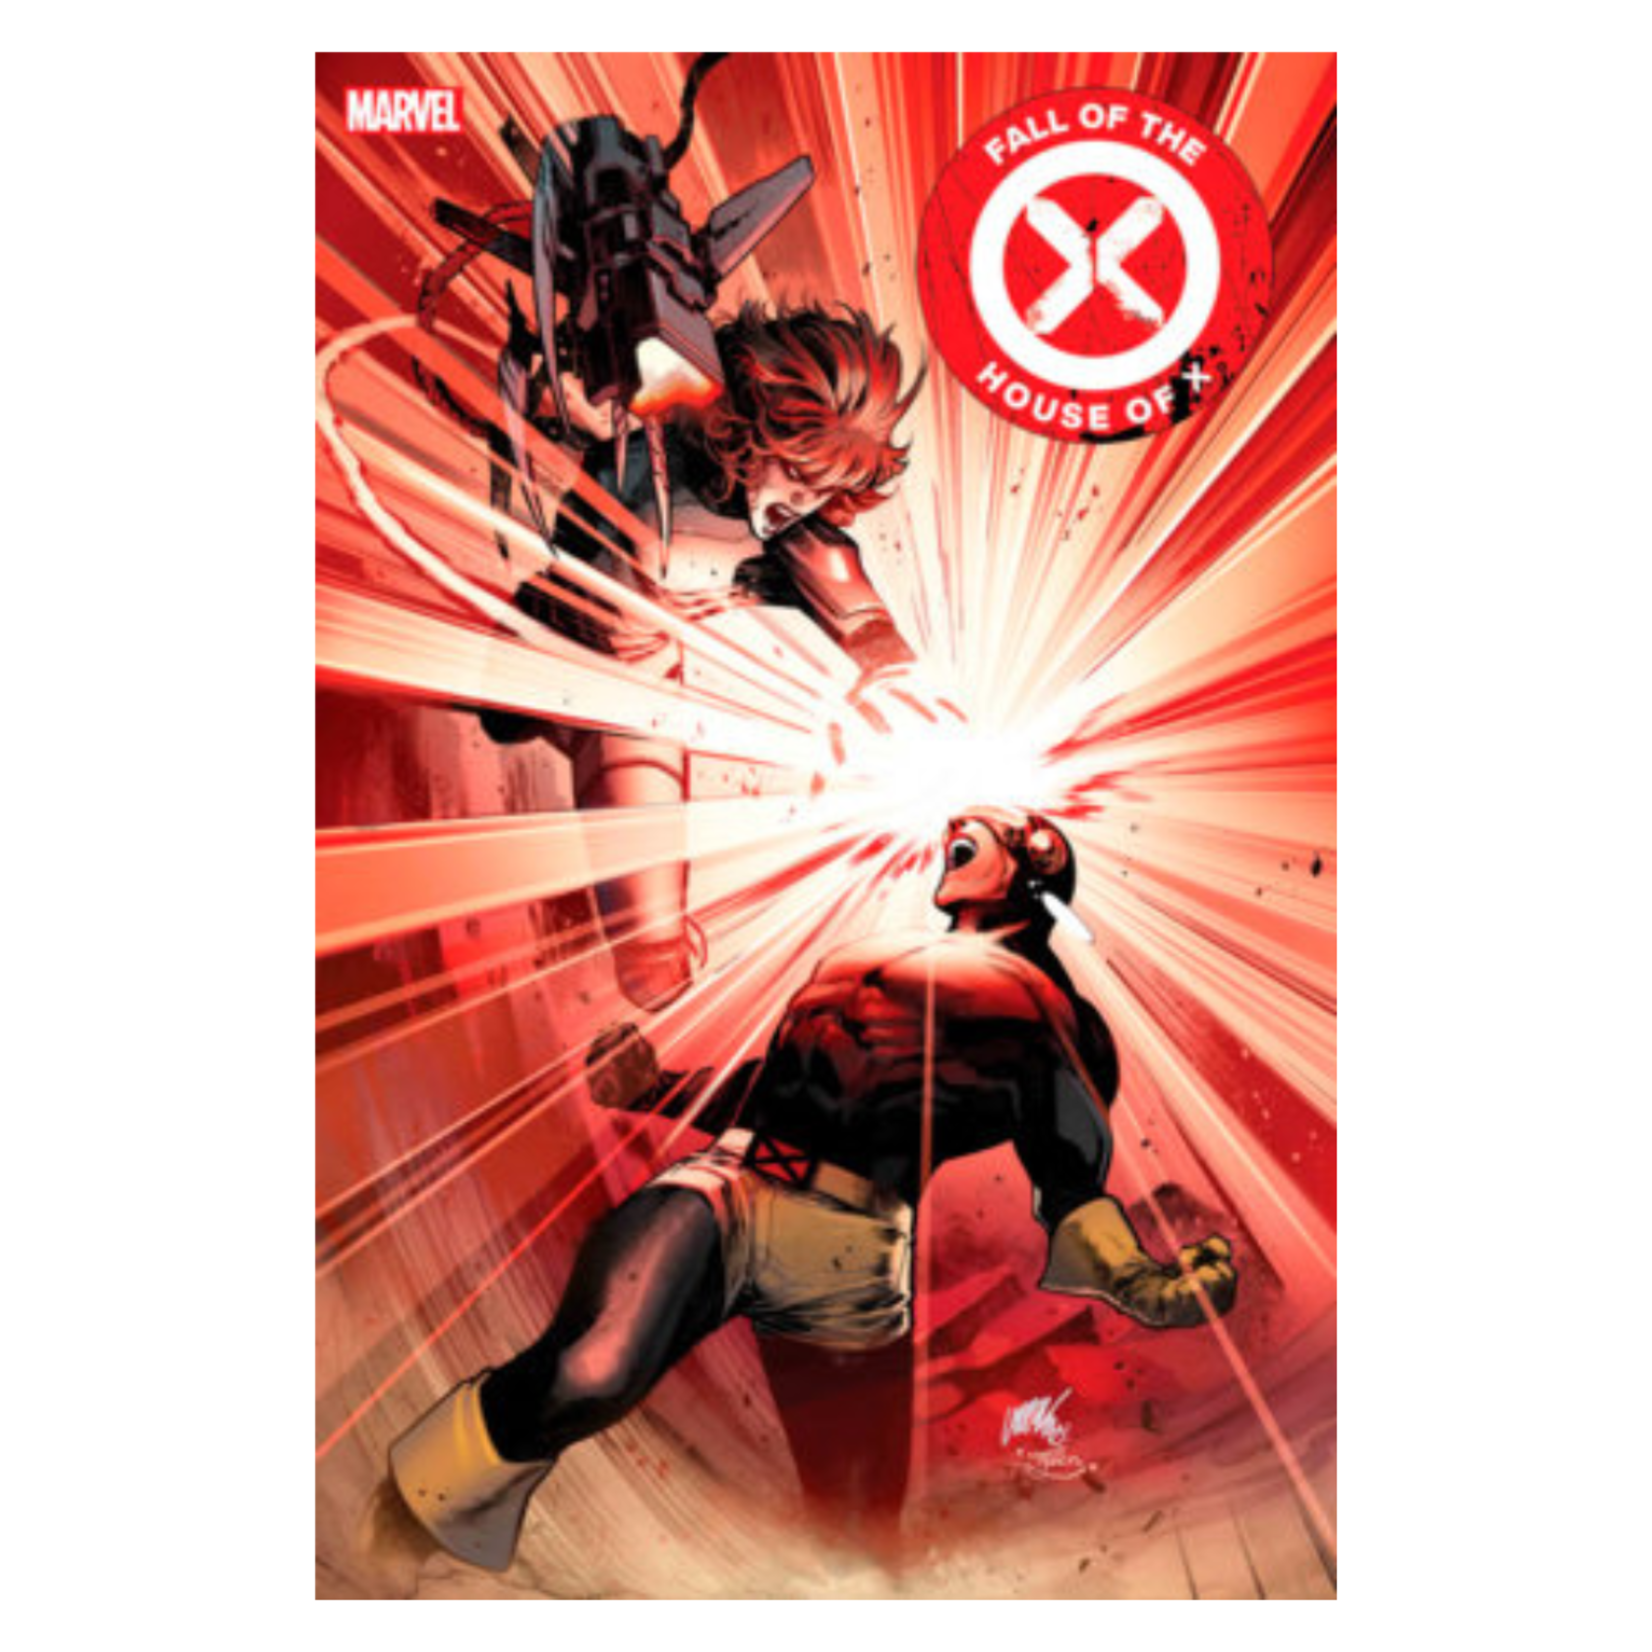 Marvel Comics Fall Of The House Of X #4 [FHX]